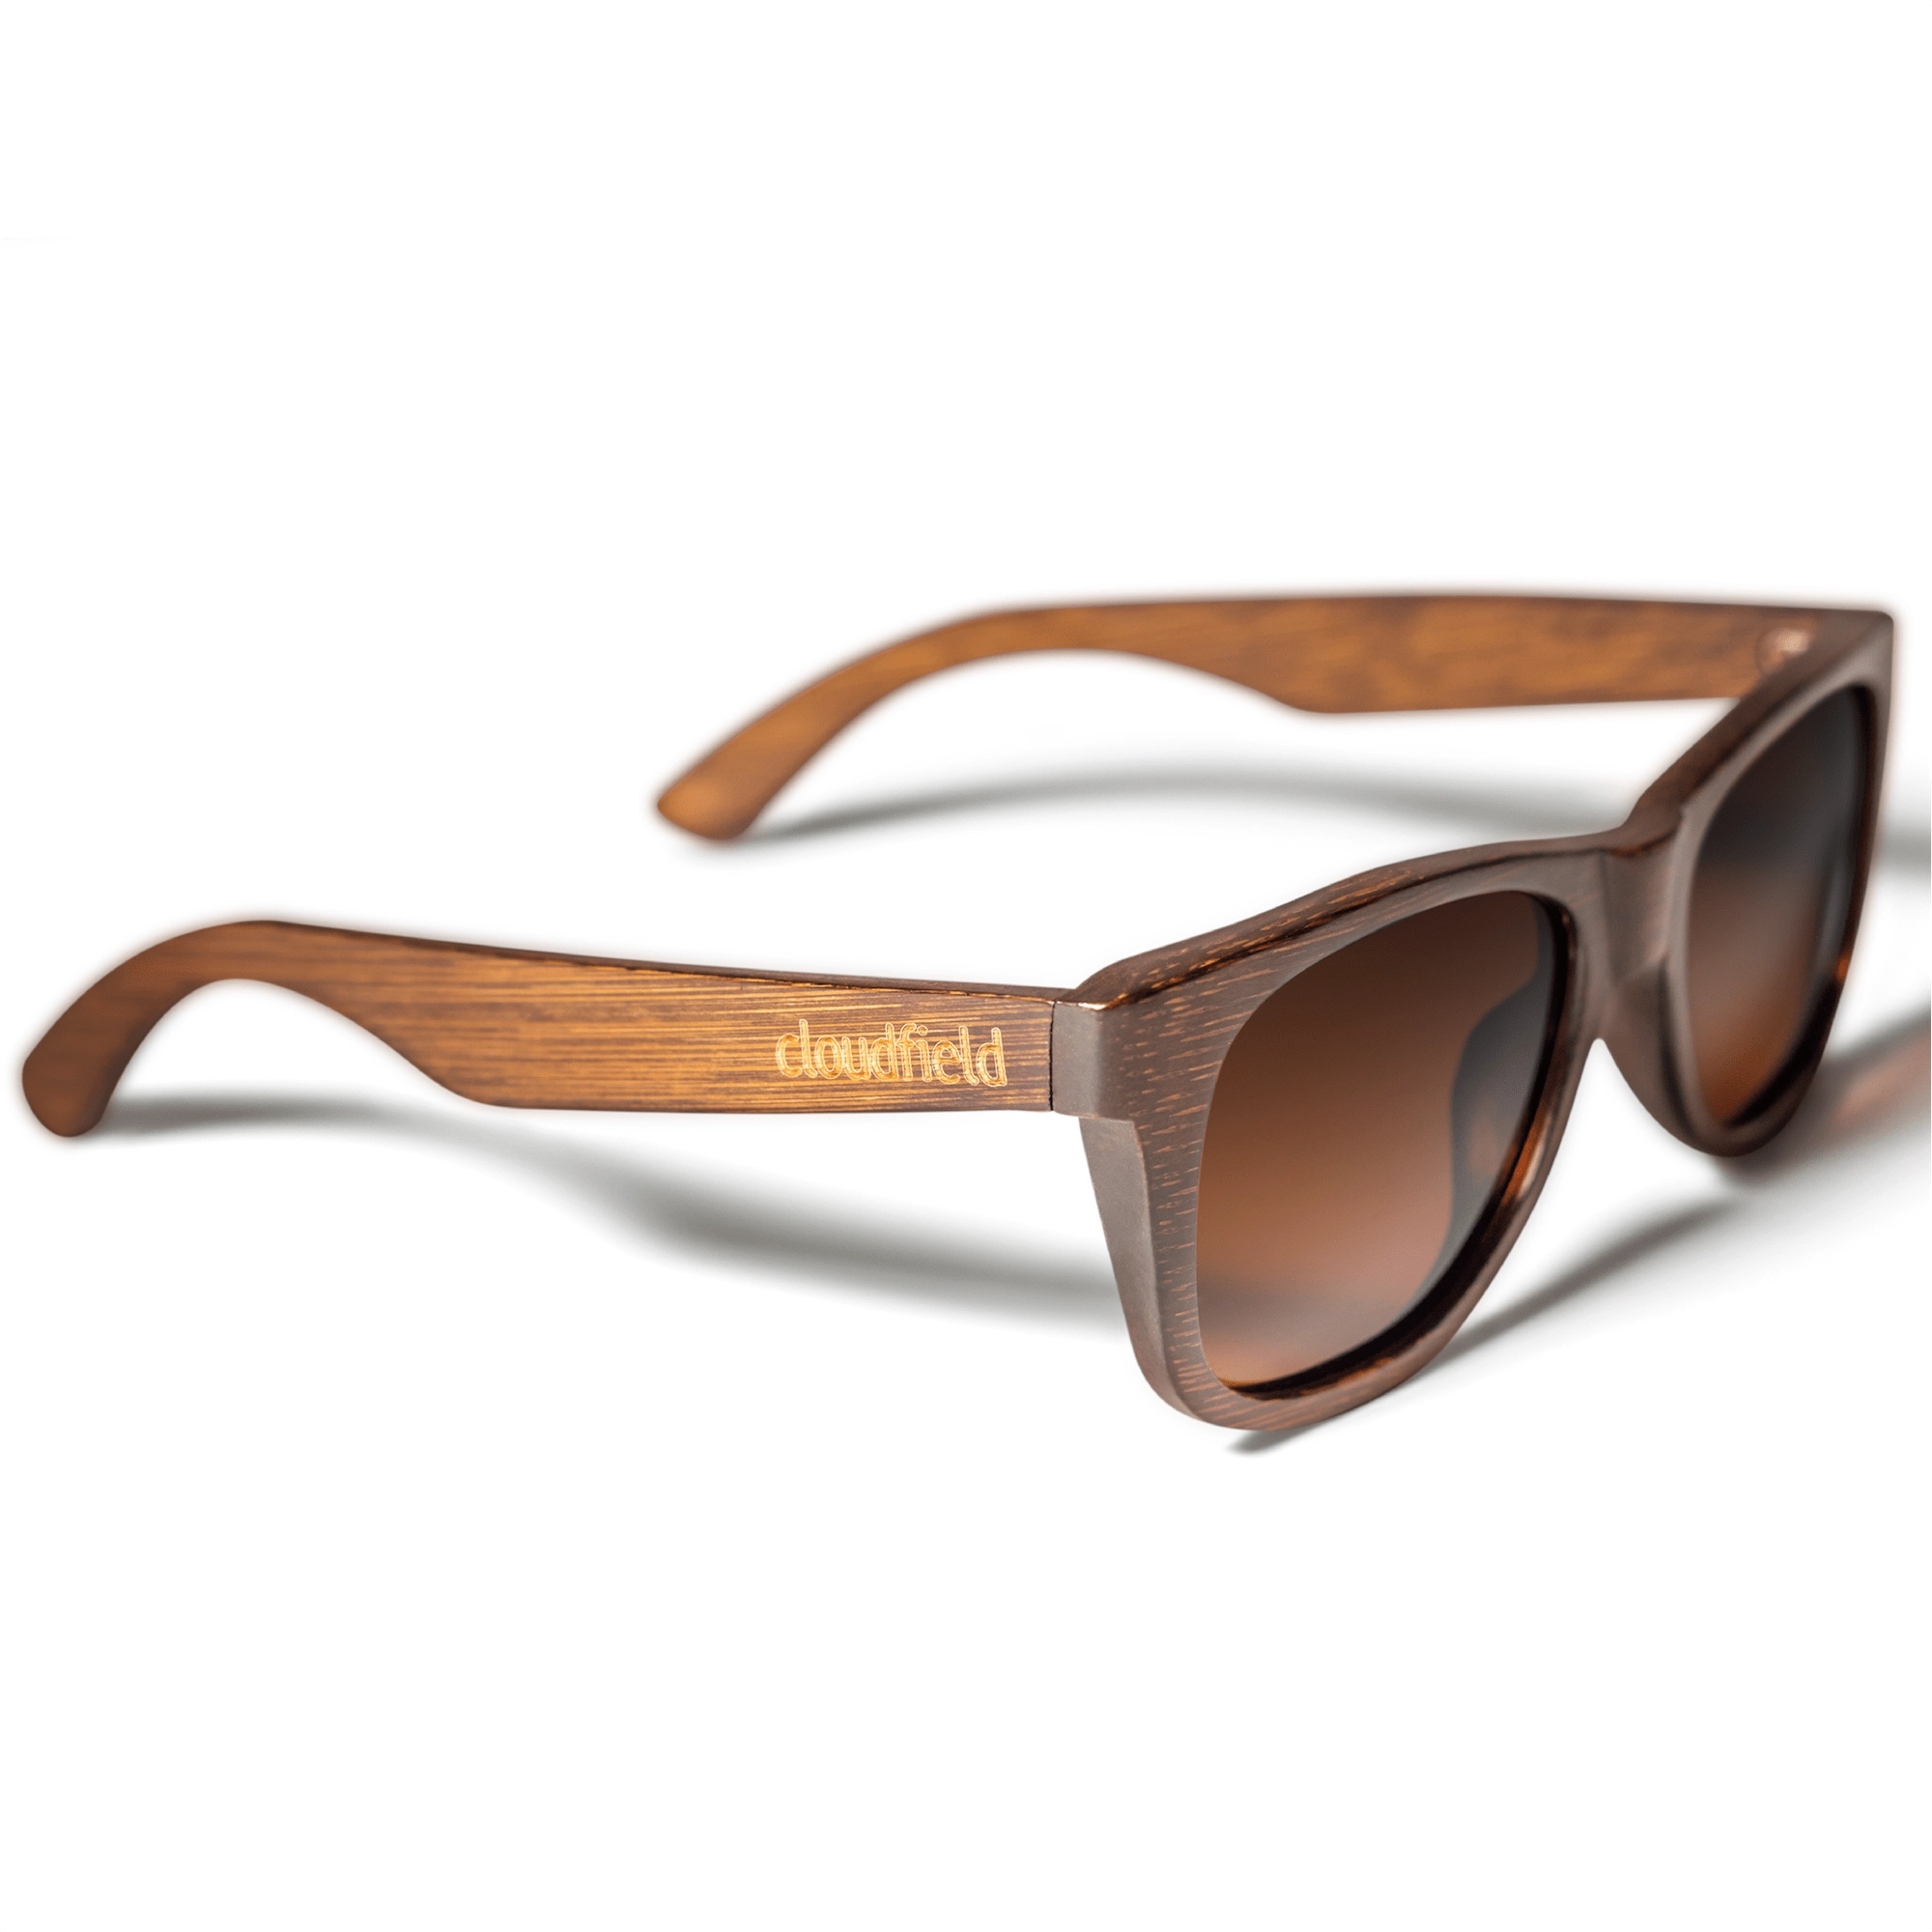 Cloudfield Unisex Polarized Wood Sunglasses - Brown